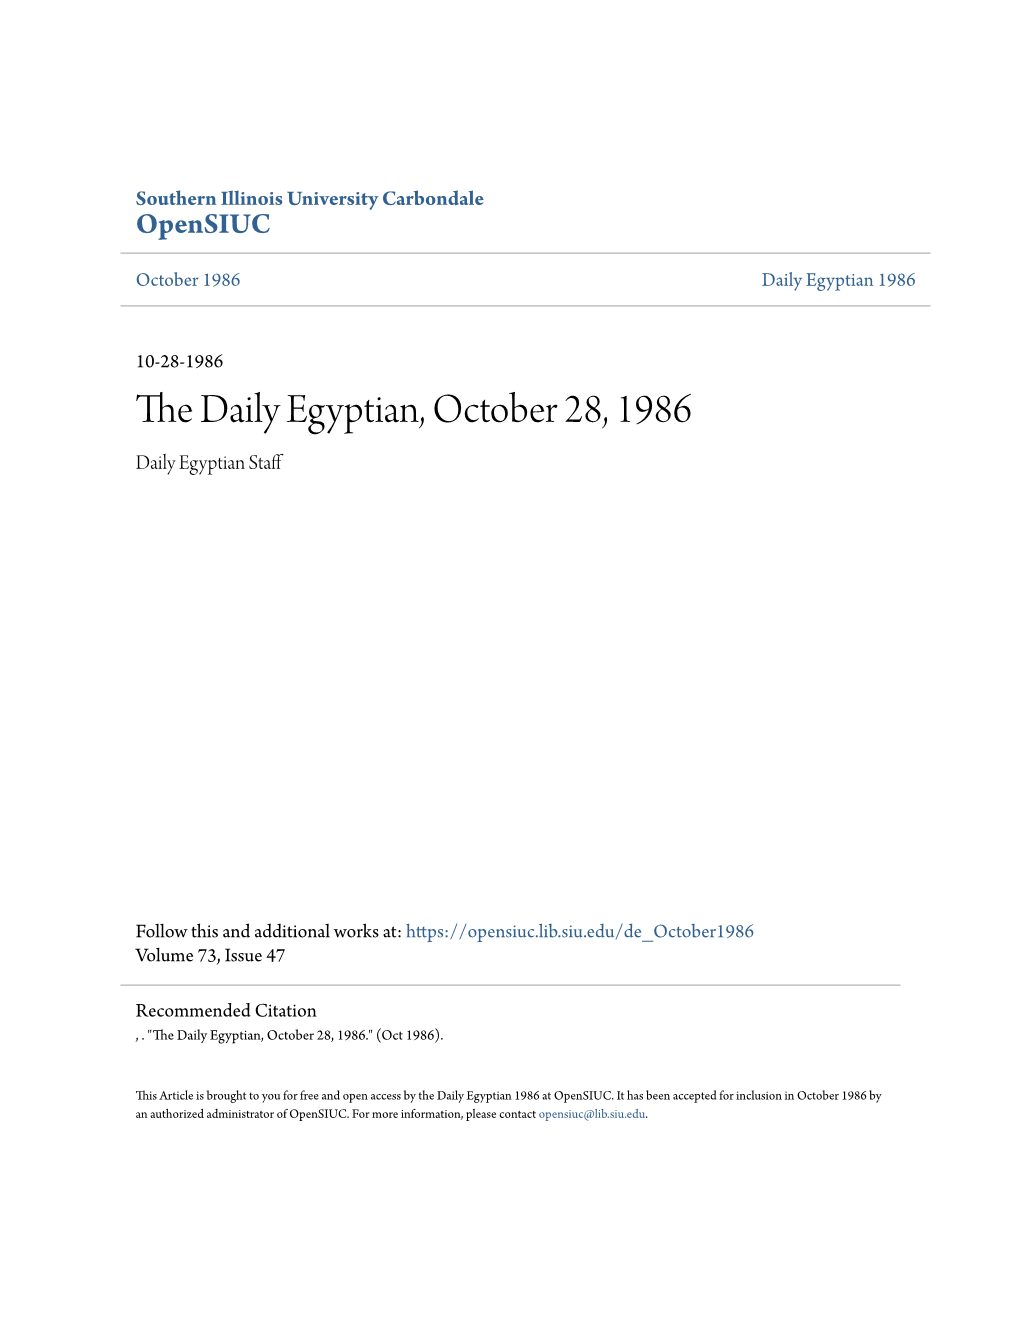 The Daily Egyptian, October 28, 1986